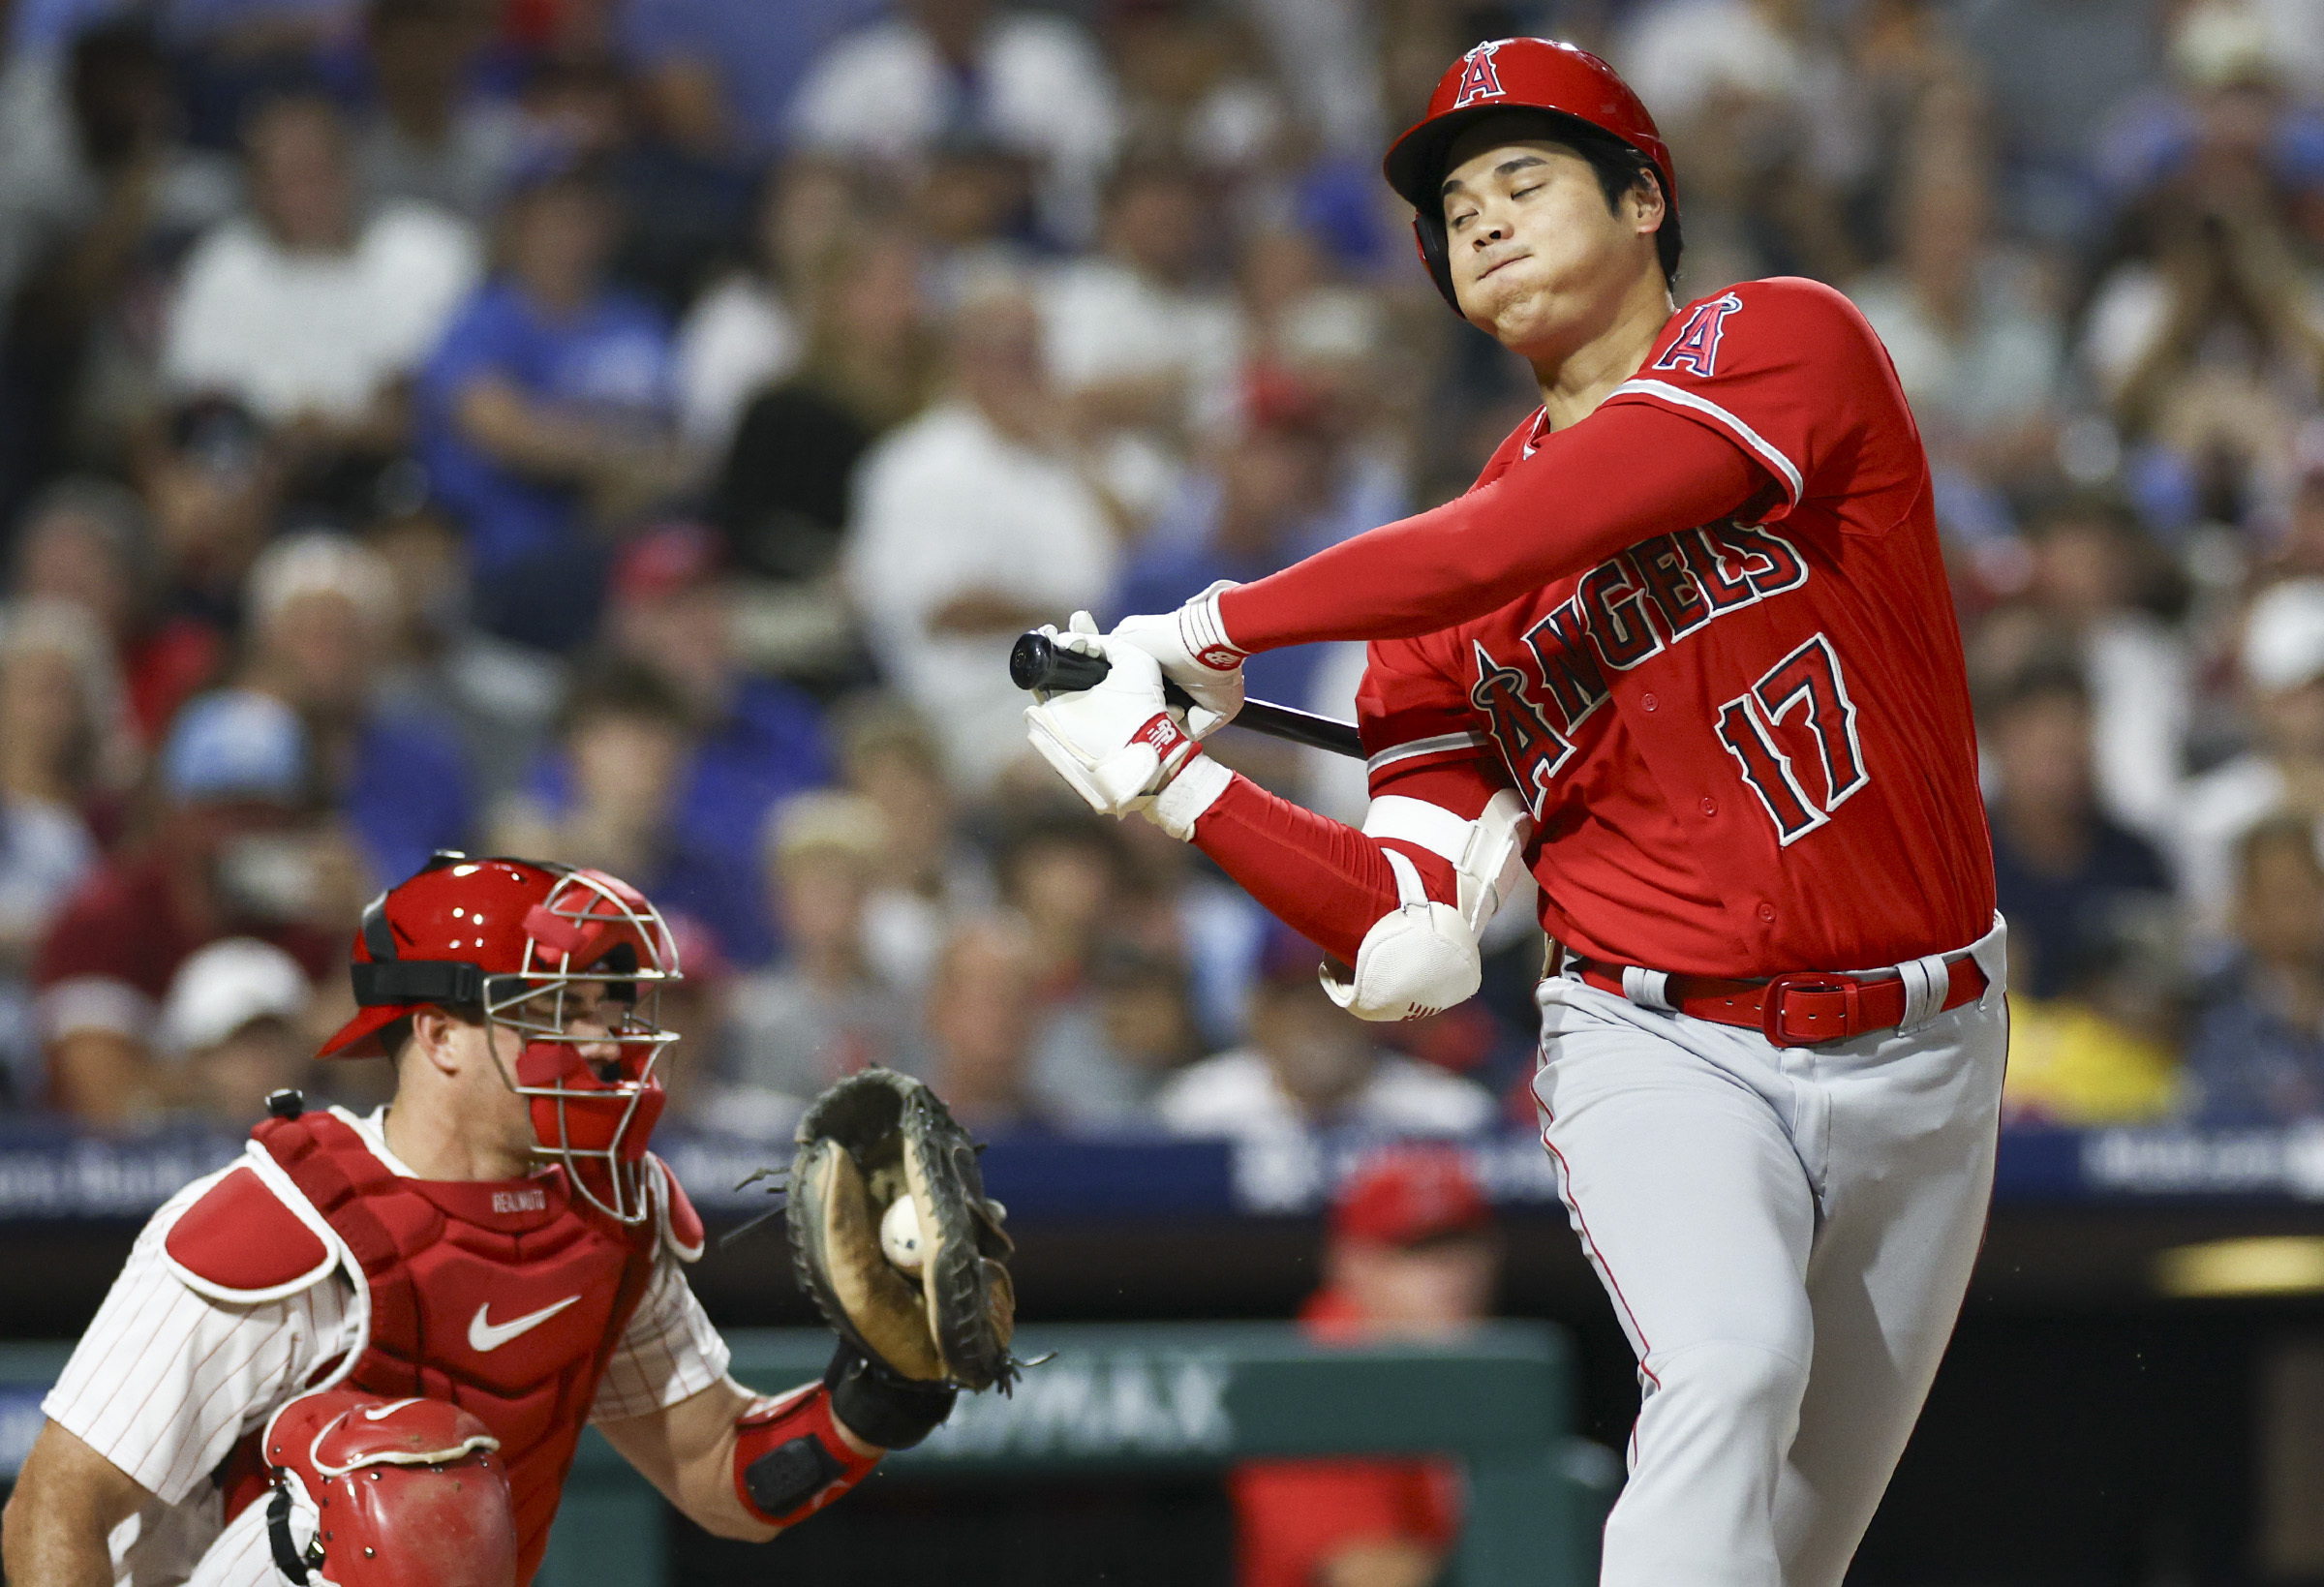 Angels' Shohei Ohtani, Mike Trout Finish In Top-15 For MLB Jersey Sales -  Angels Nation